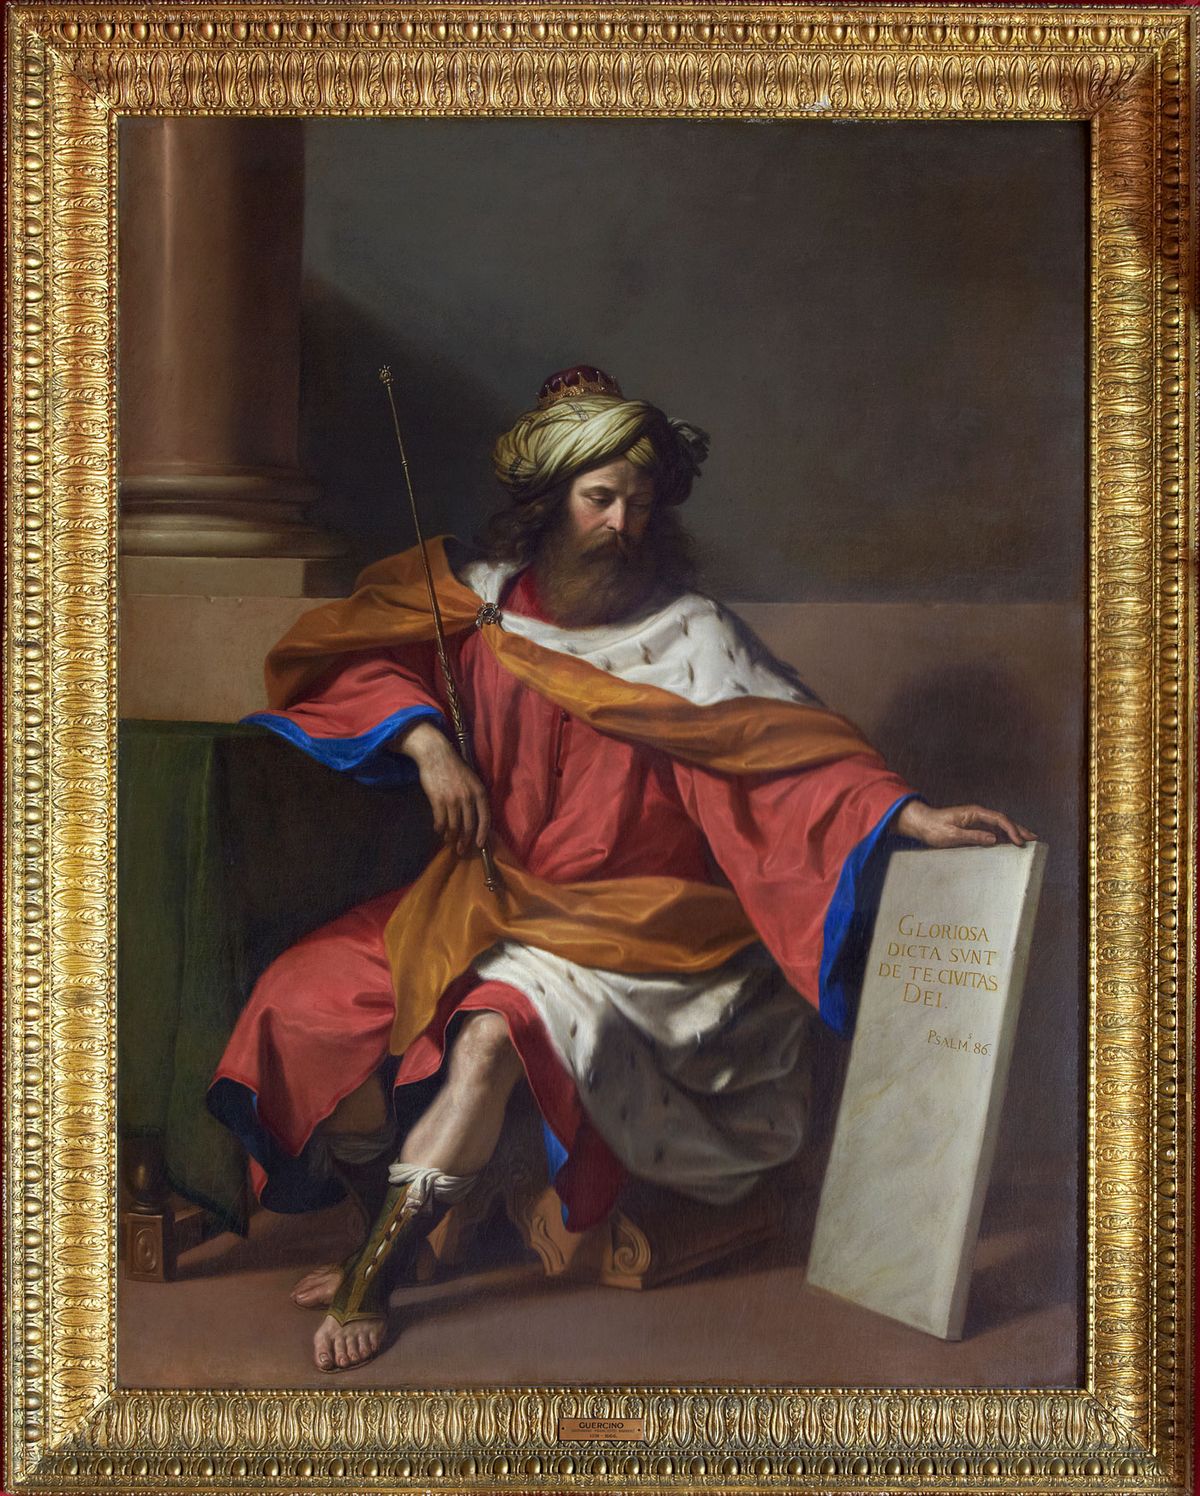 Guercino, King David, 1651. The painting was acquired from the Farnese collection by the first Earl Spencer in 1768 for Spencer House. It was moved to Althorp House, Northamptonshire, in the 1920s. Jacob Rothschild bought the painting, for Spencer House, from the Spencer family in 2010 Rothschild family, Waddesdon Manor. Photograph © Peter Smith Jarrold Publishing 